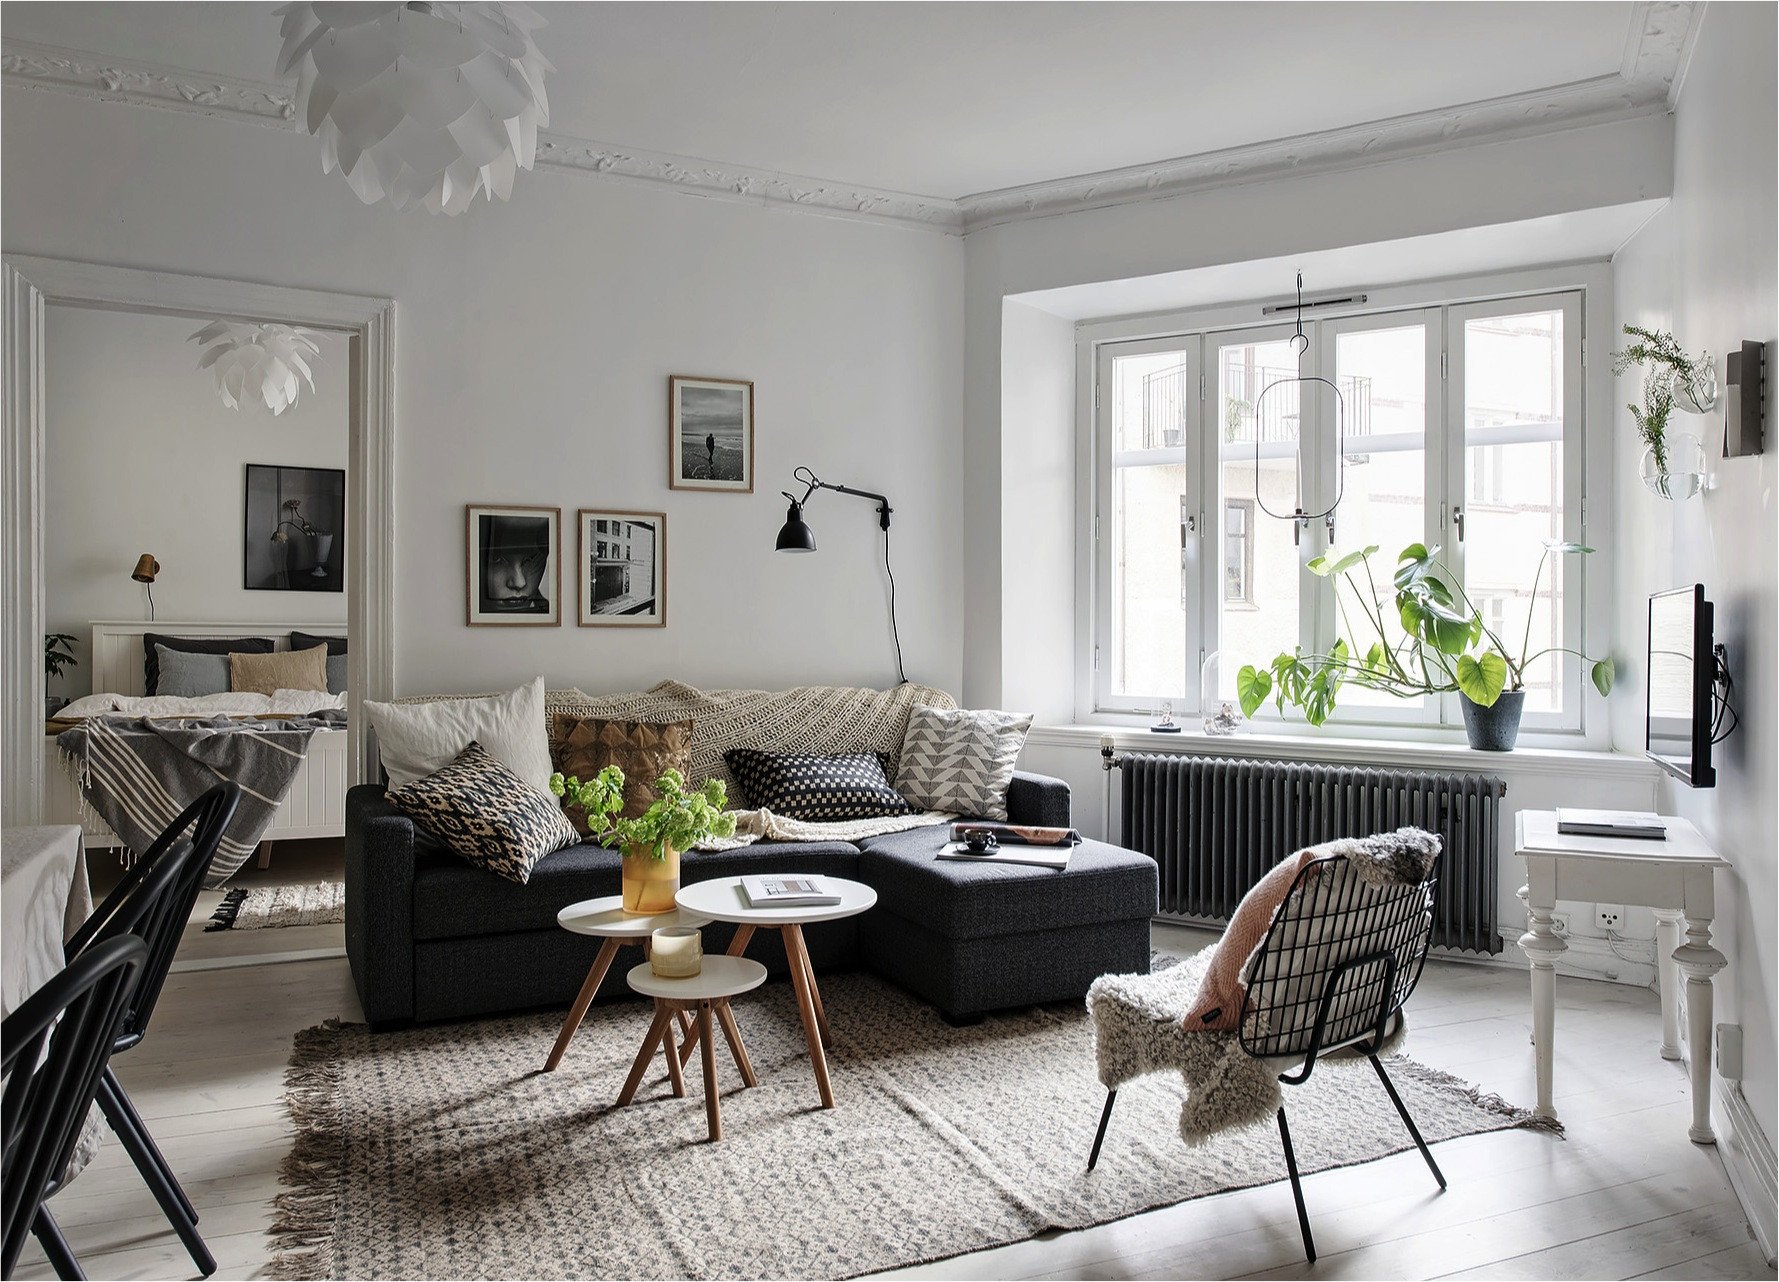 Small Living Room Diy Ideas Fresh 8 Clever Small Living Room Ideas with Scandi Style Diy Home Decor Your Diy Family